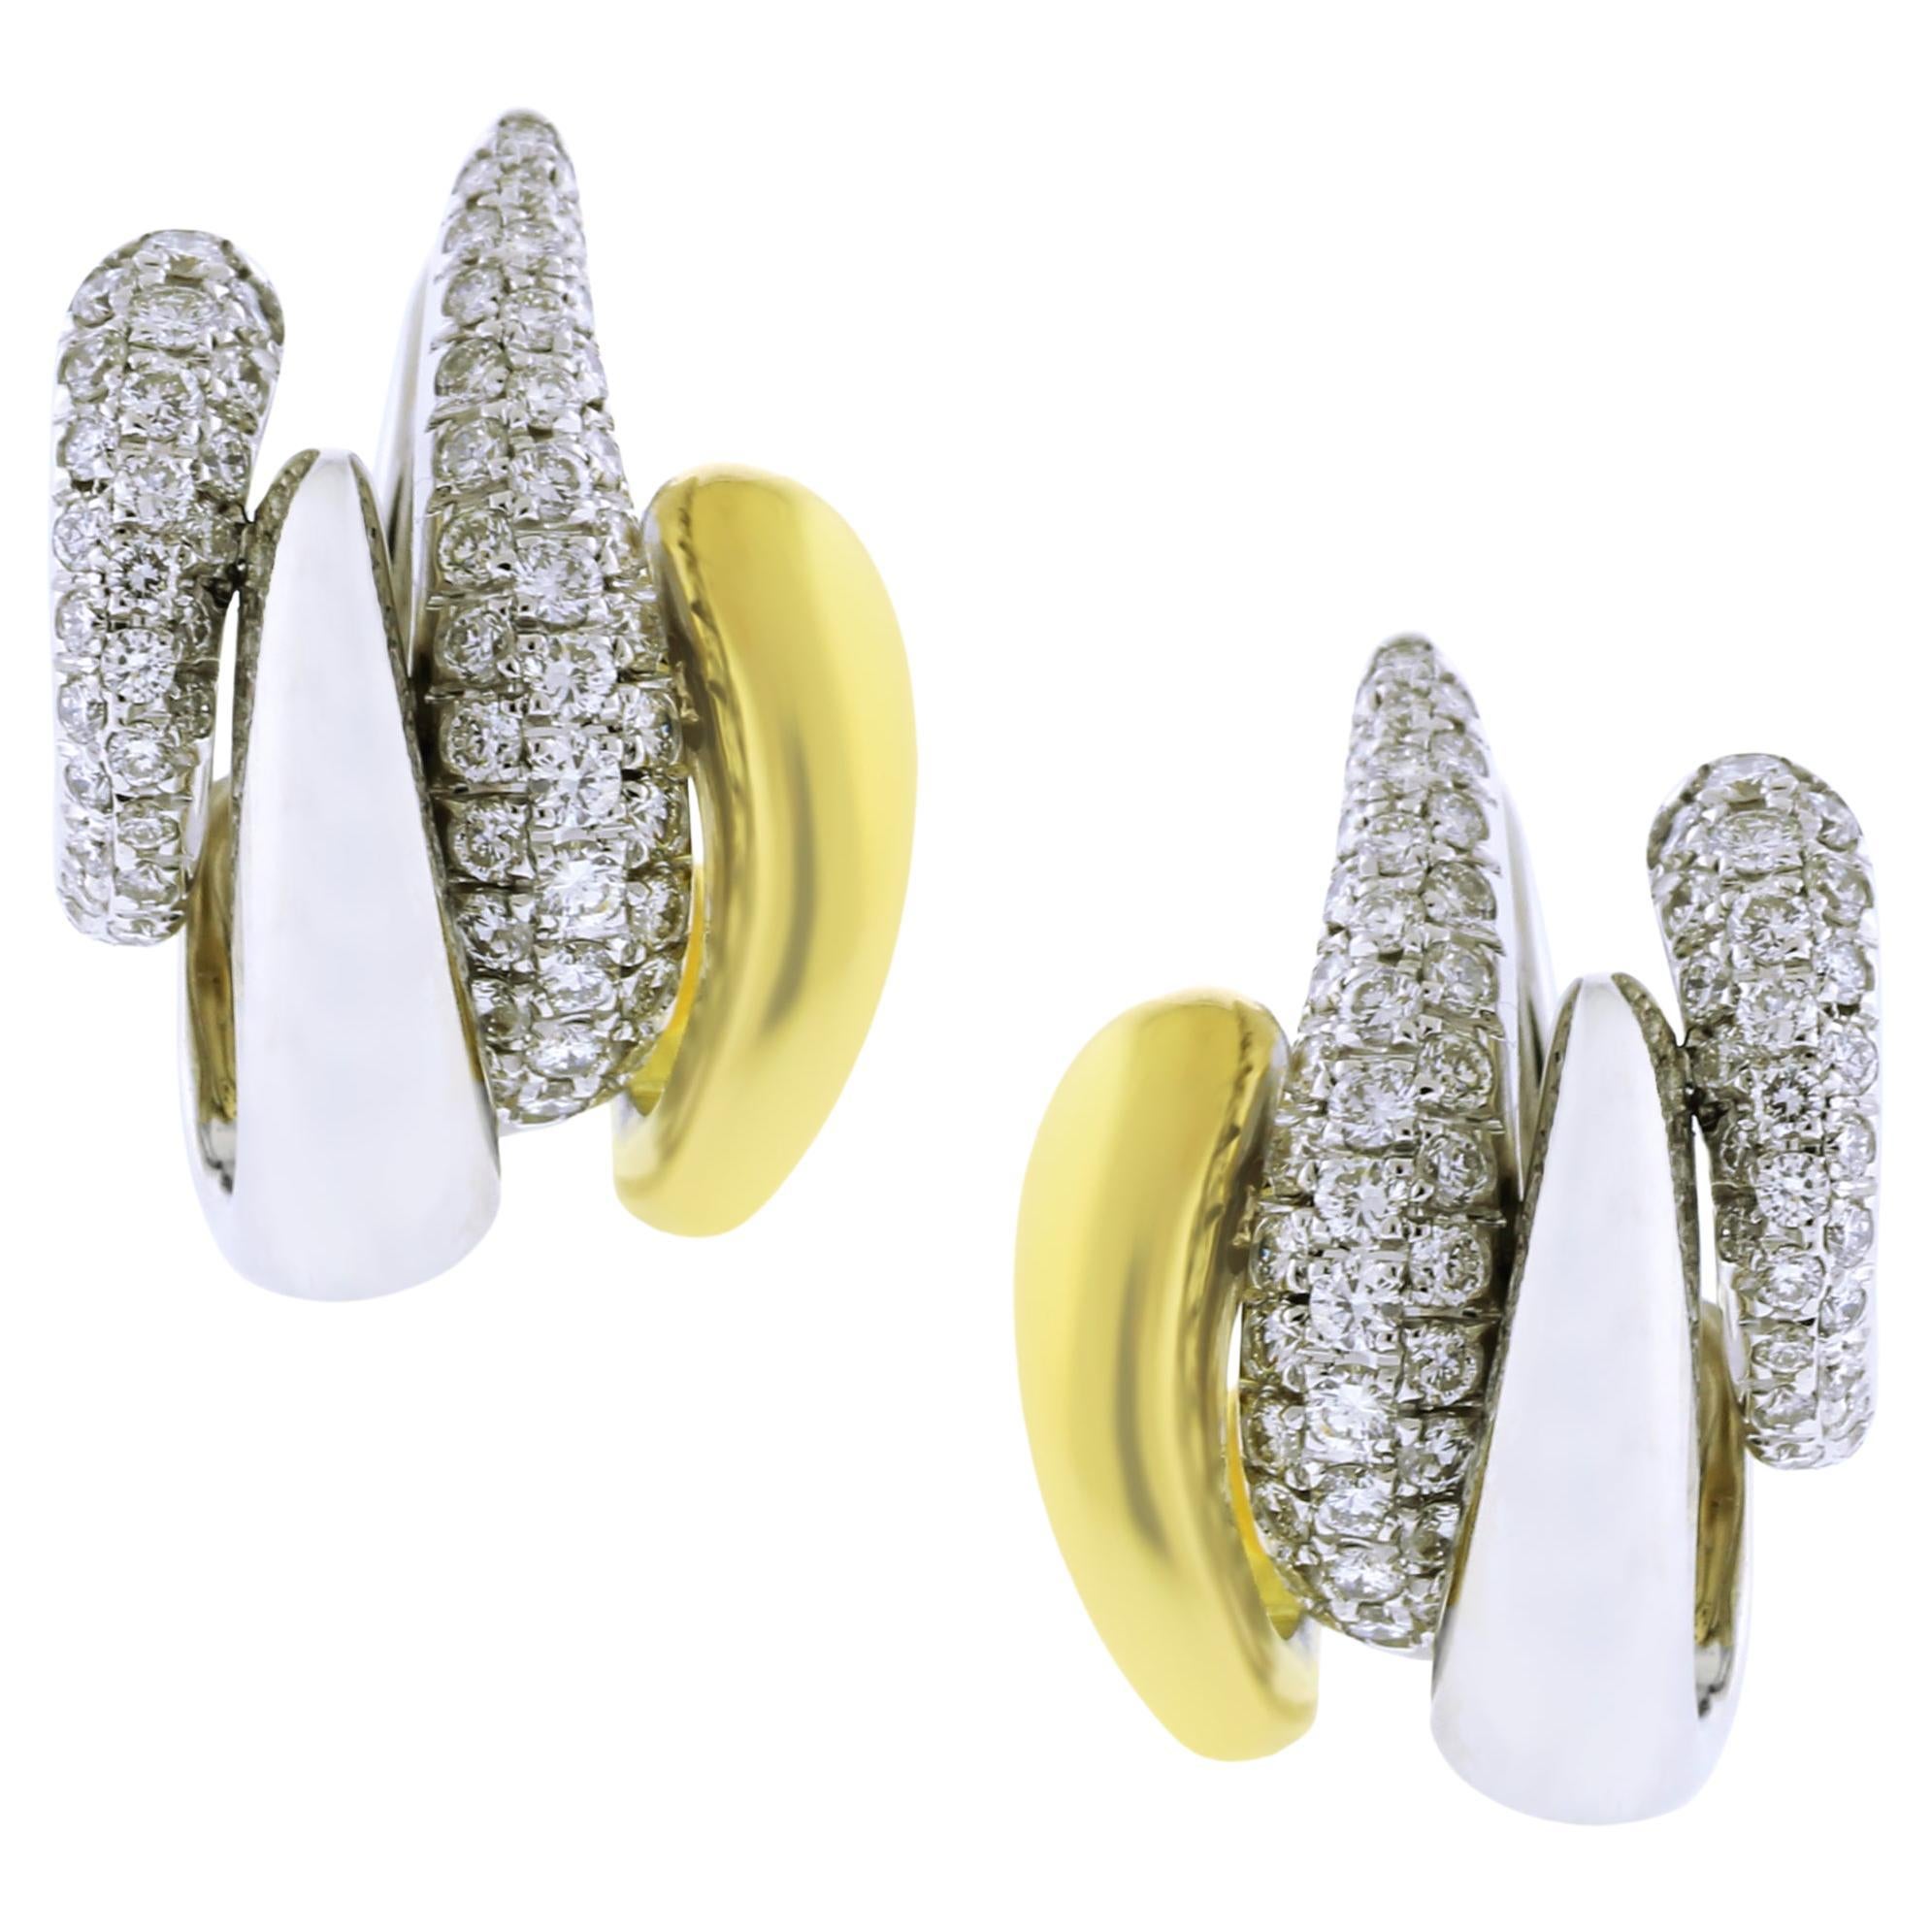 Pomellato 18kt White and Yellow Gold Diamond Pave Earrings